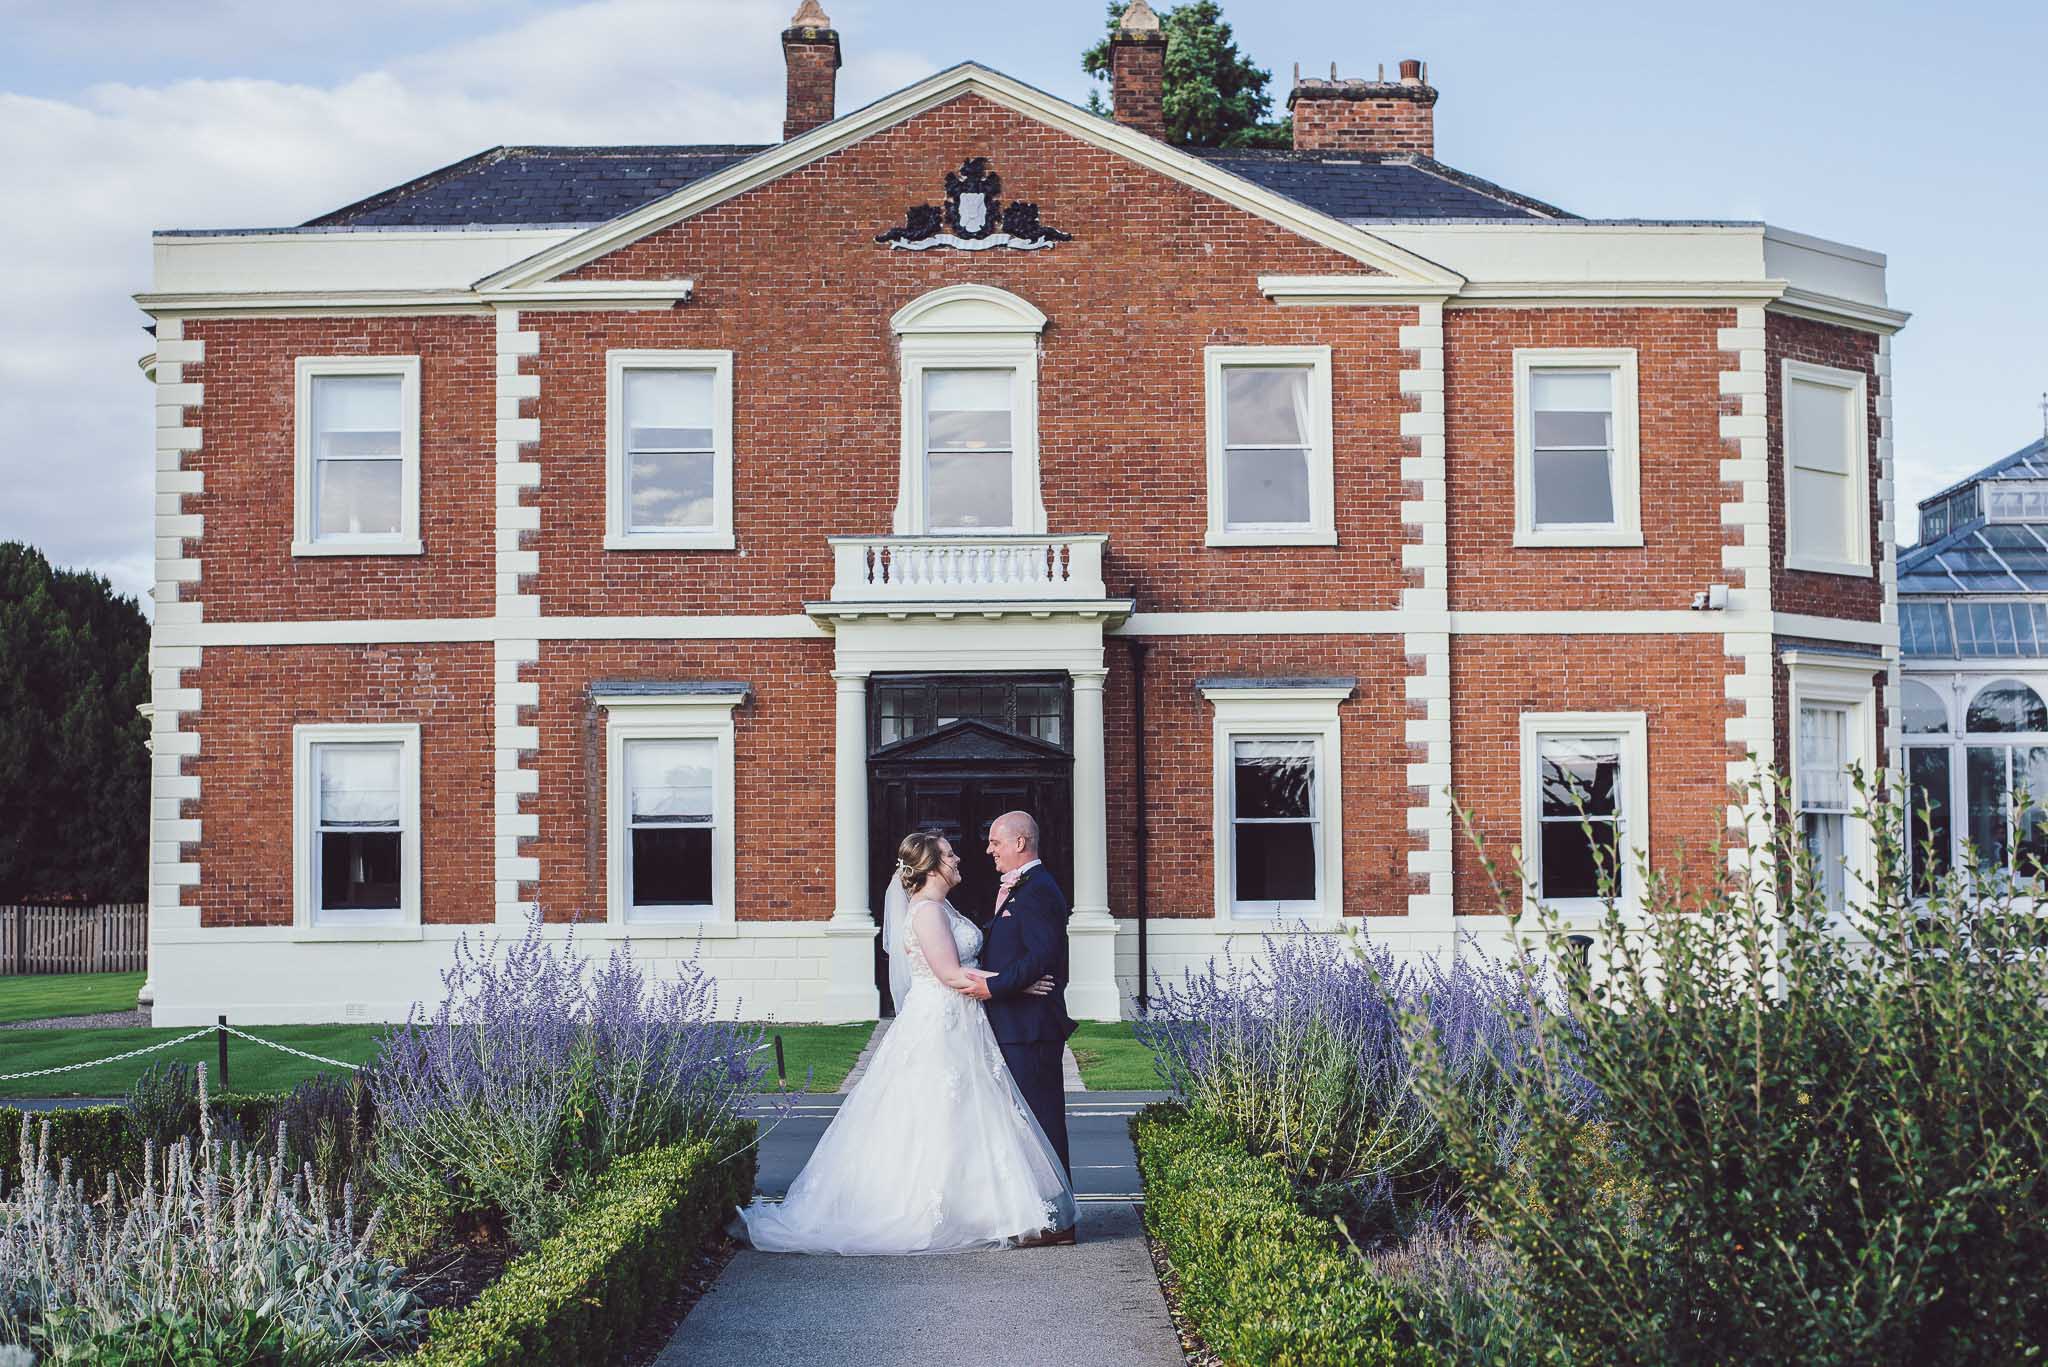 Bride & Groom standing in front of the DoubleTree Hilton in Chester, Cheshire